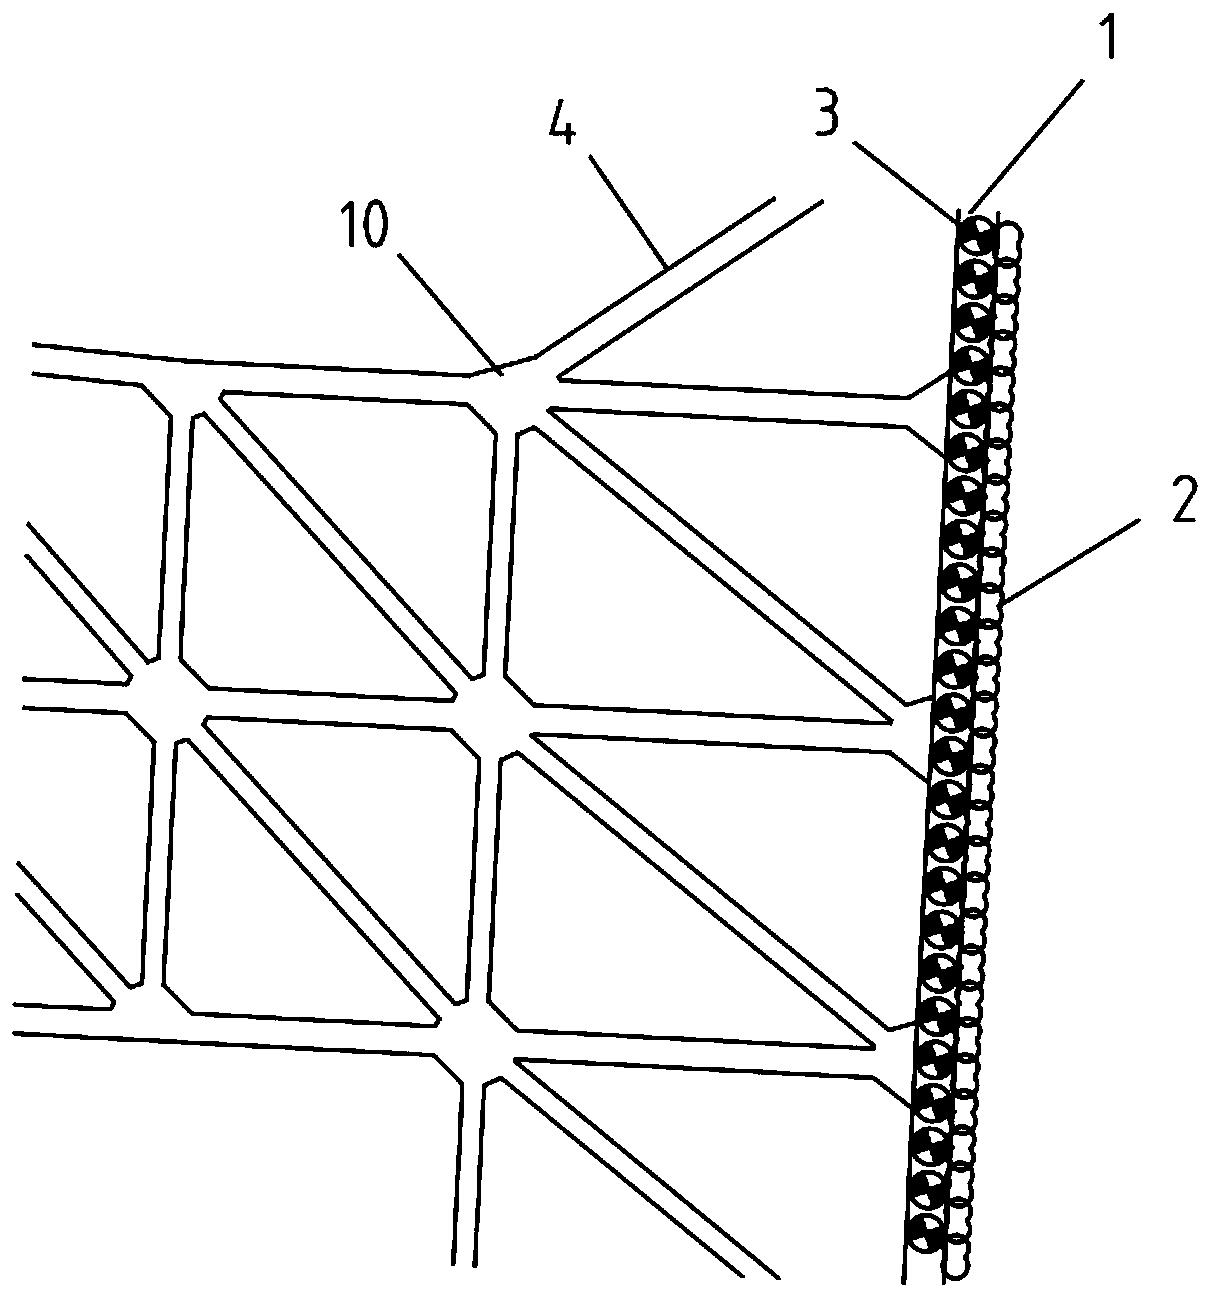 Deformation control structure for foundation pit of shallow foundation building adjacent to underground parking on soft soil and construction method